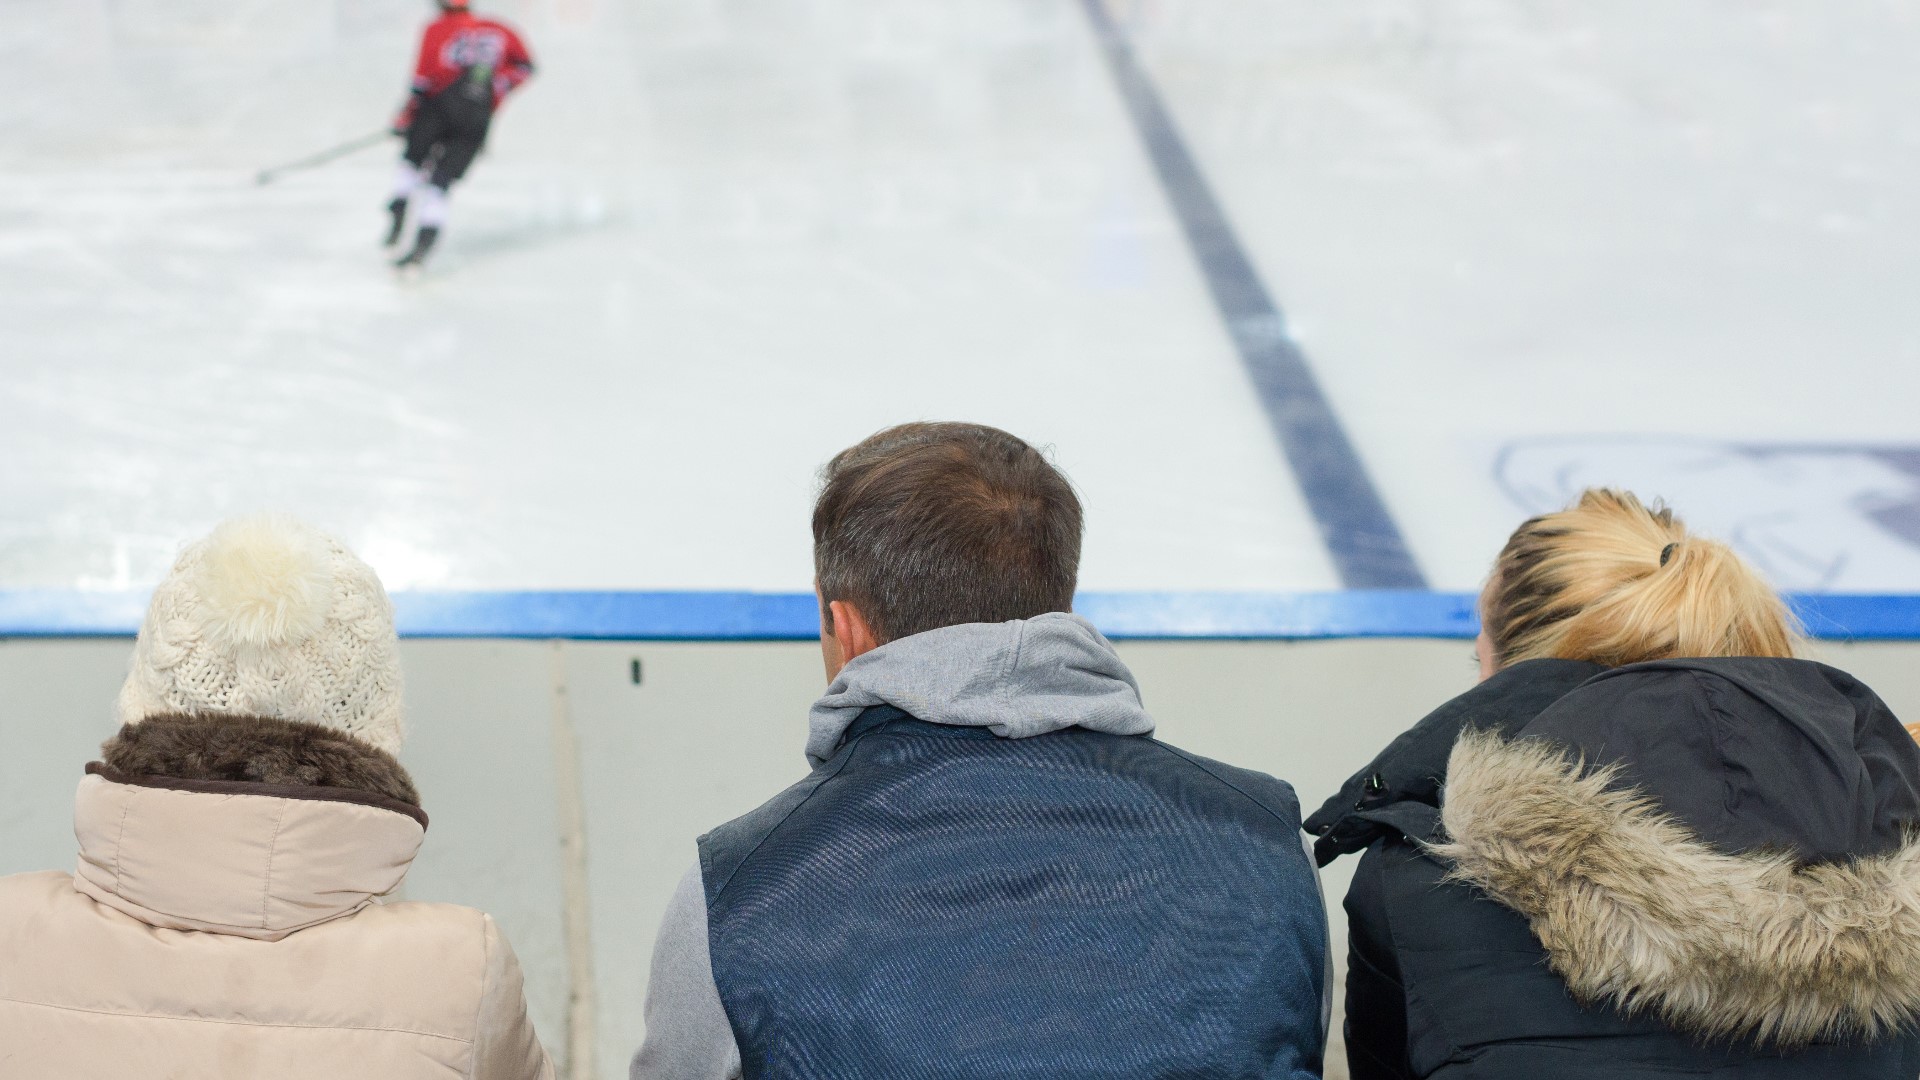 Although you're not shooting the ball or passing the puck, a sports parent can either help make the season fun and positive or drench it in misery.